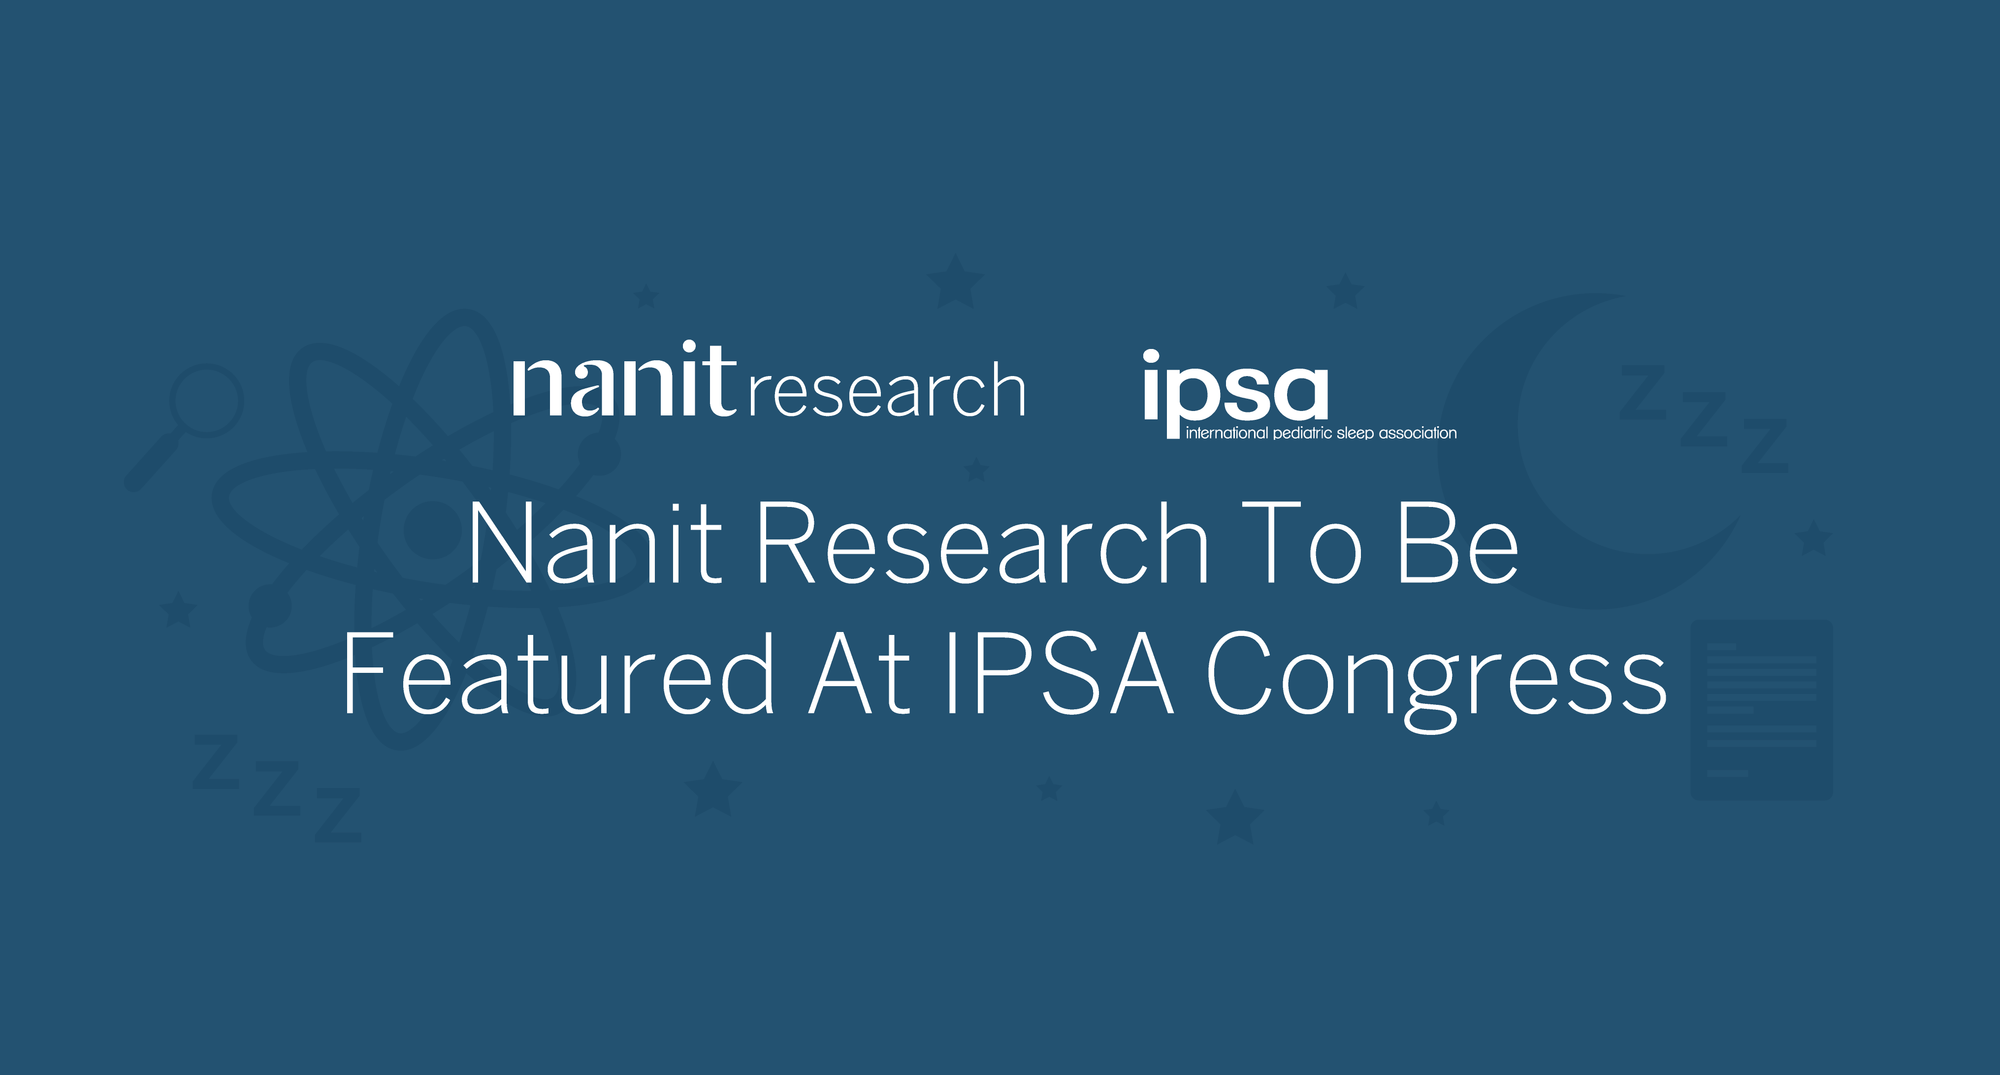 Nanit Research To Be Featured At IPSA Congress